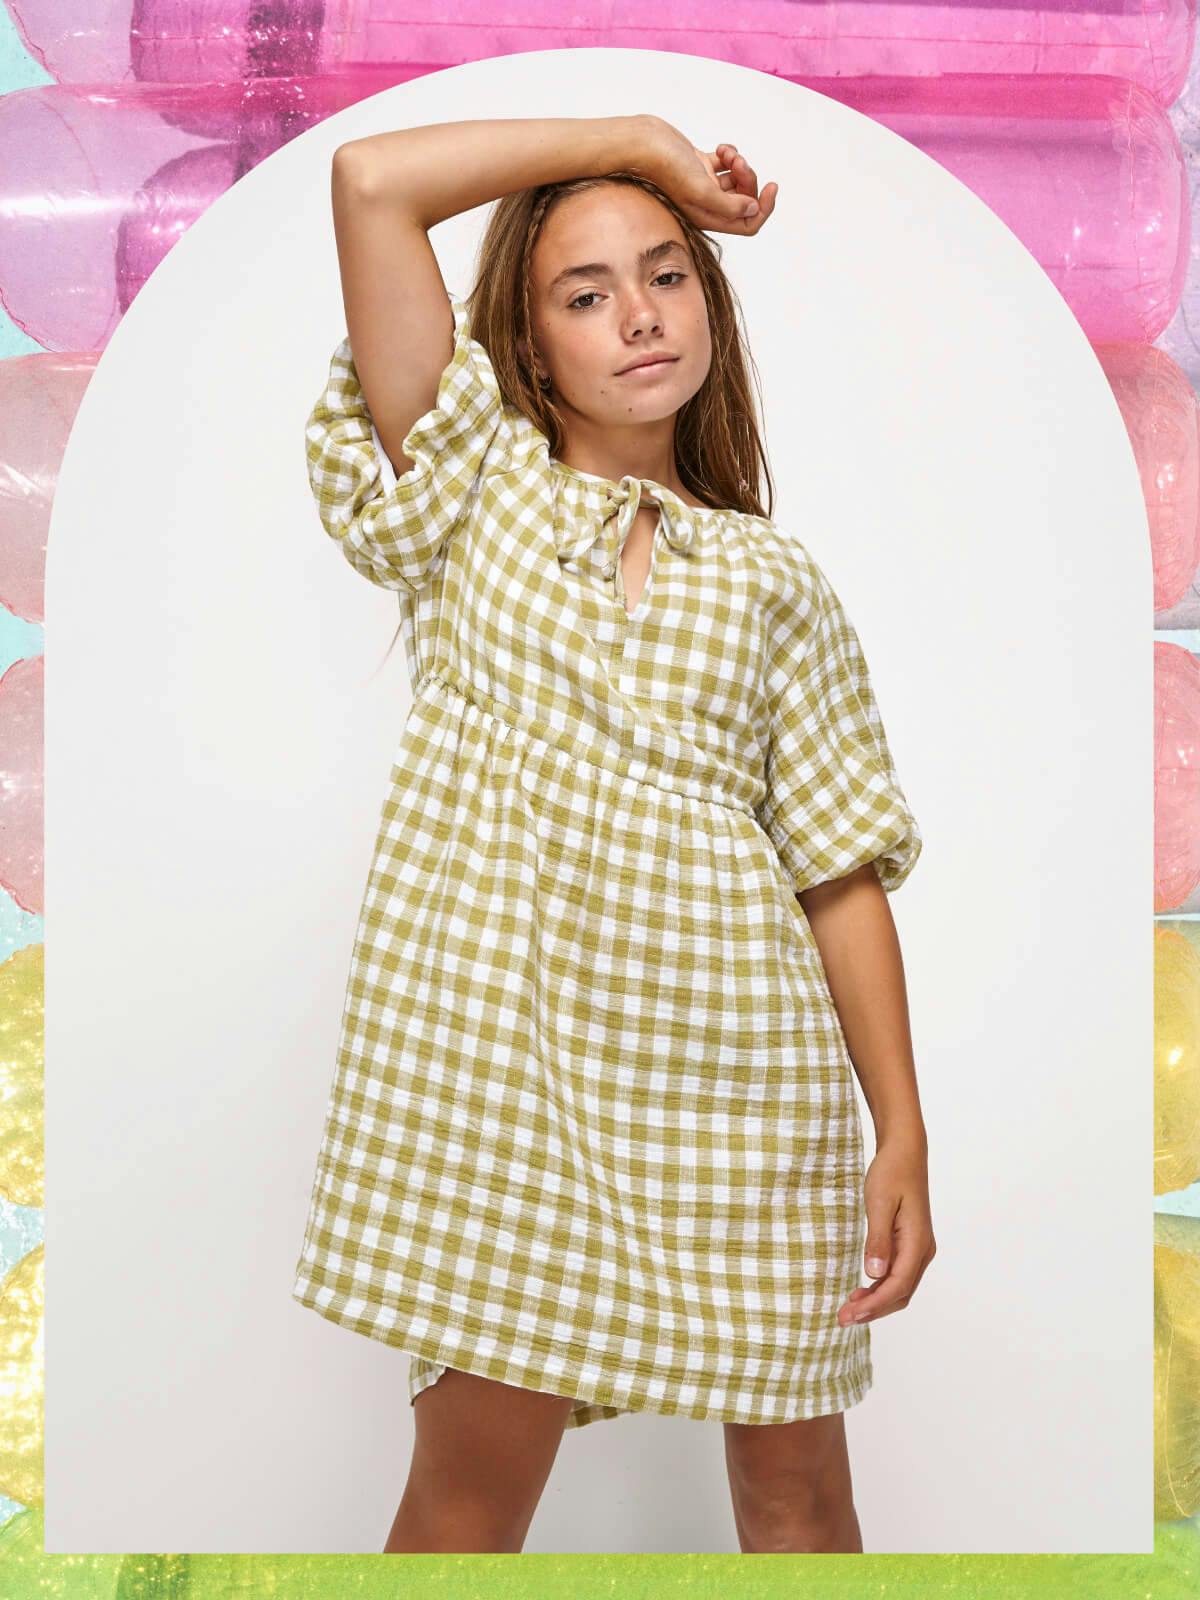 Image of teen model wearing a green check dress with puff sleeves. The image is cut out in an arch shape with rainbow pool toy. 